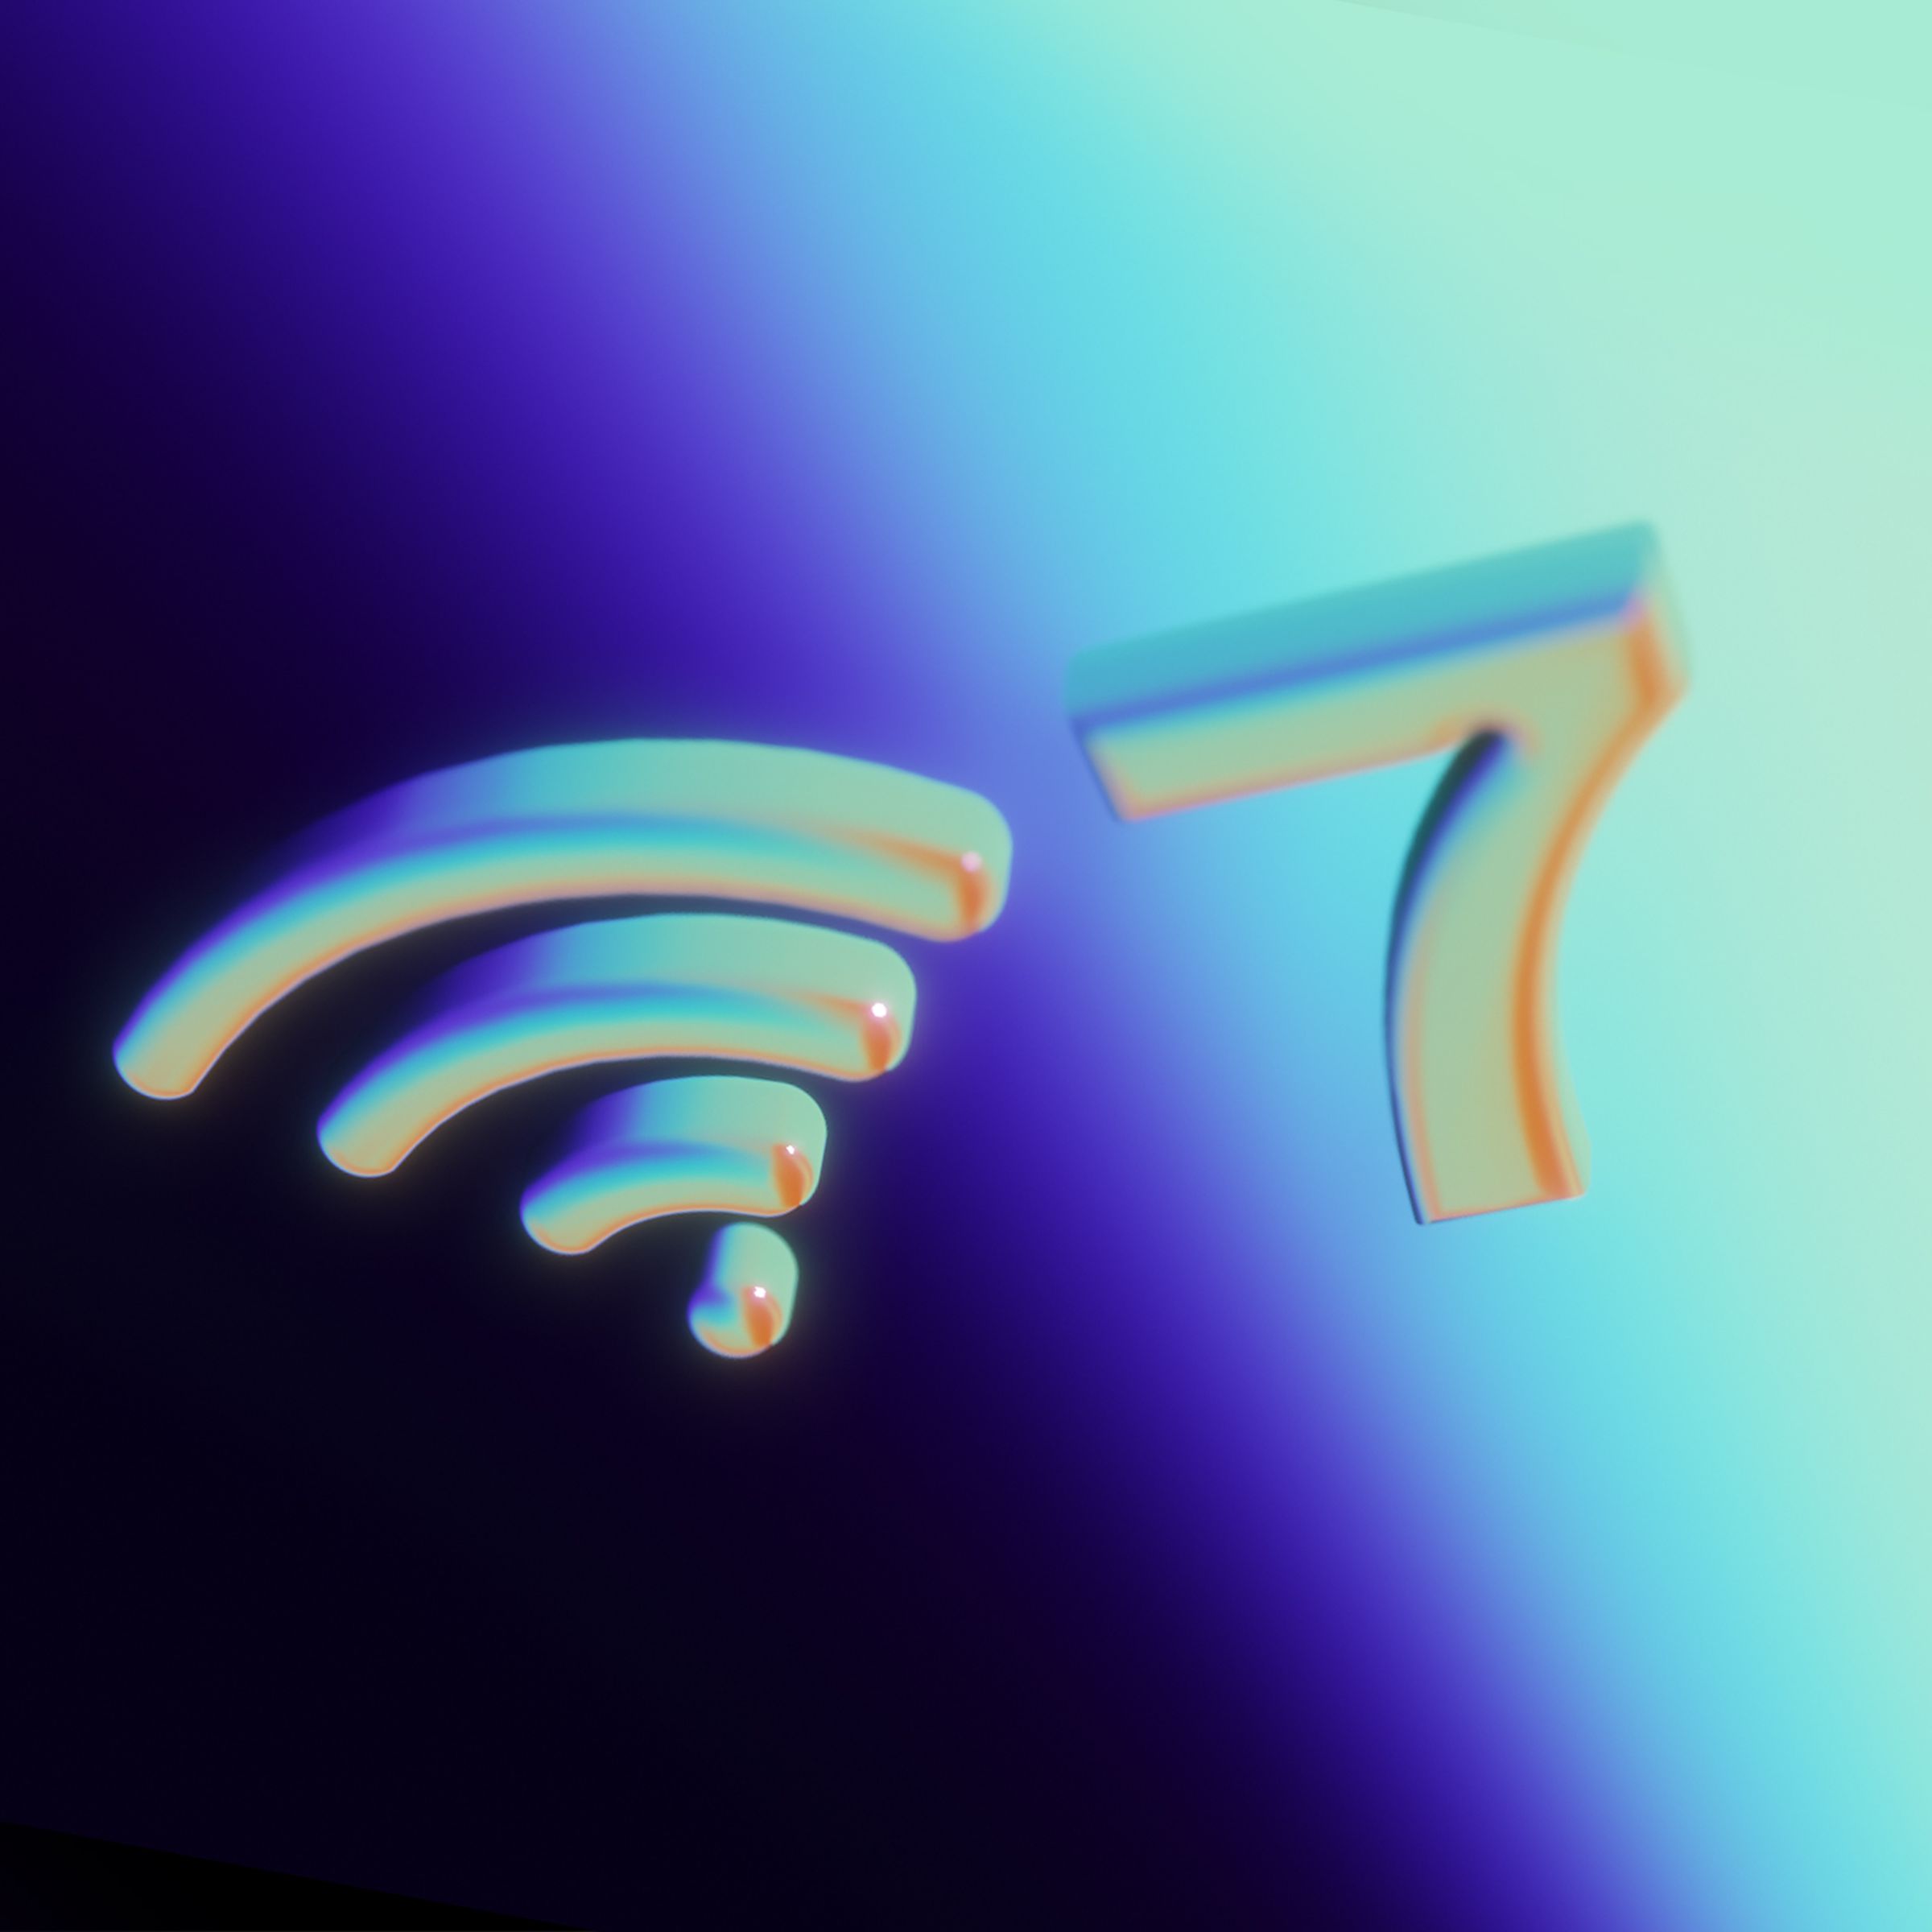 3D Wi-Fi symbol next to the letter 7.